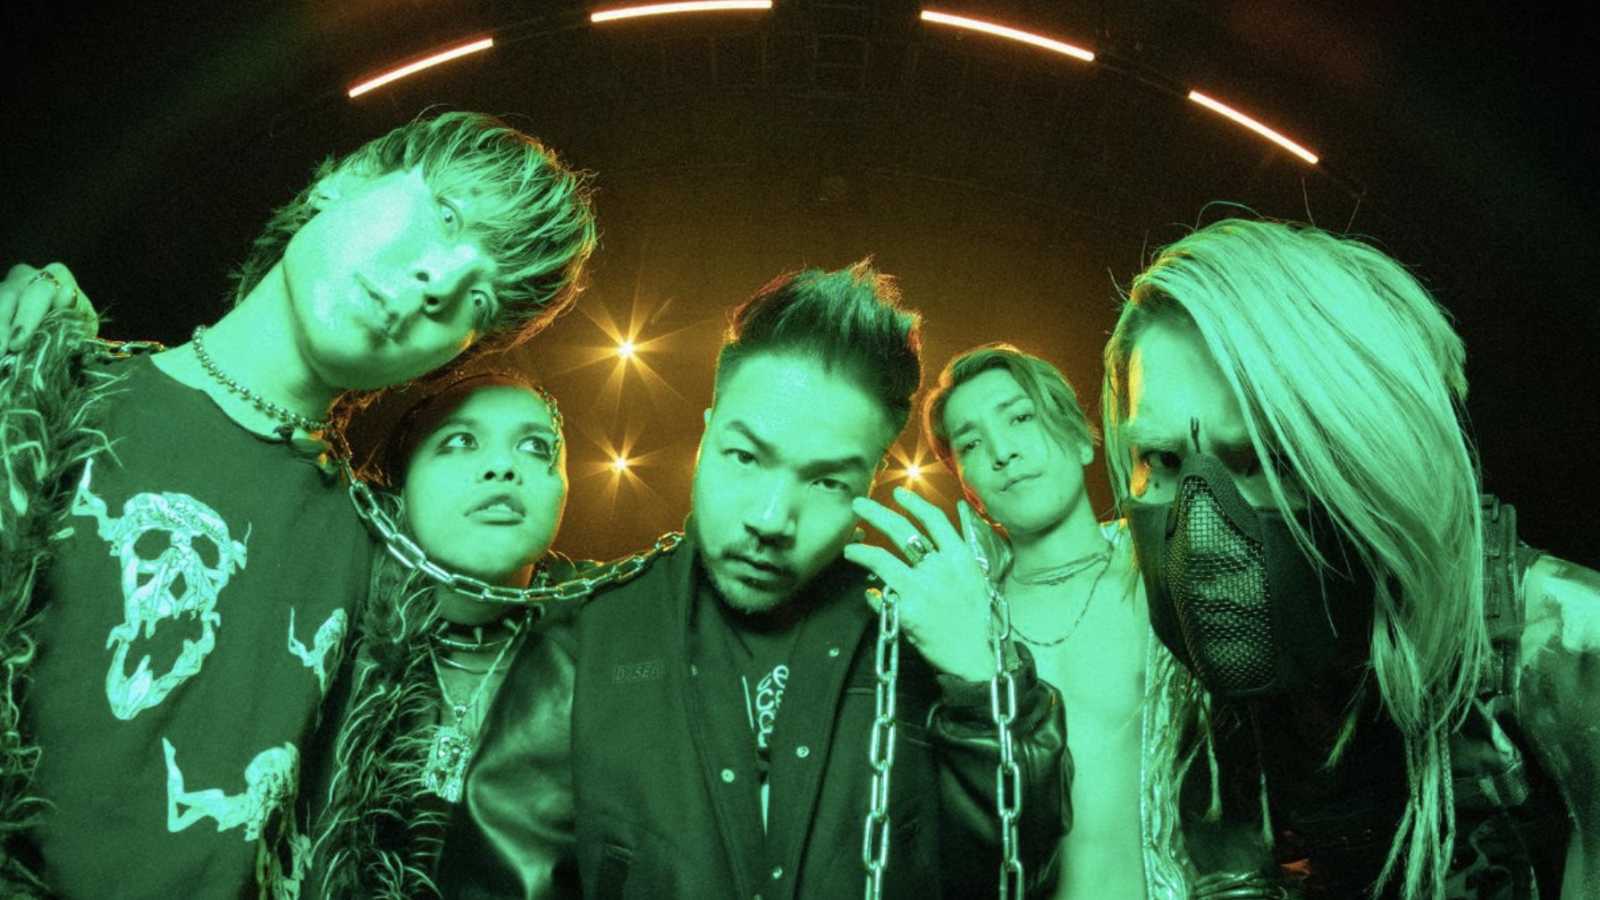 CROSSFAITH Cancel World Tour and All Live Shows © CROSSFAITH. All rights reserved.